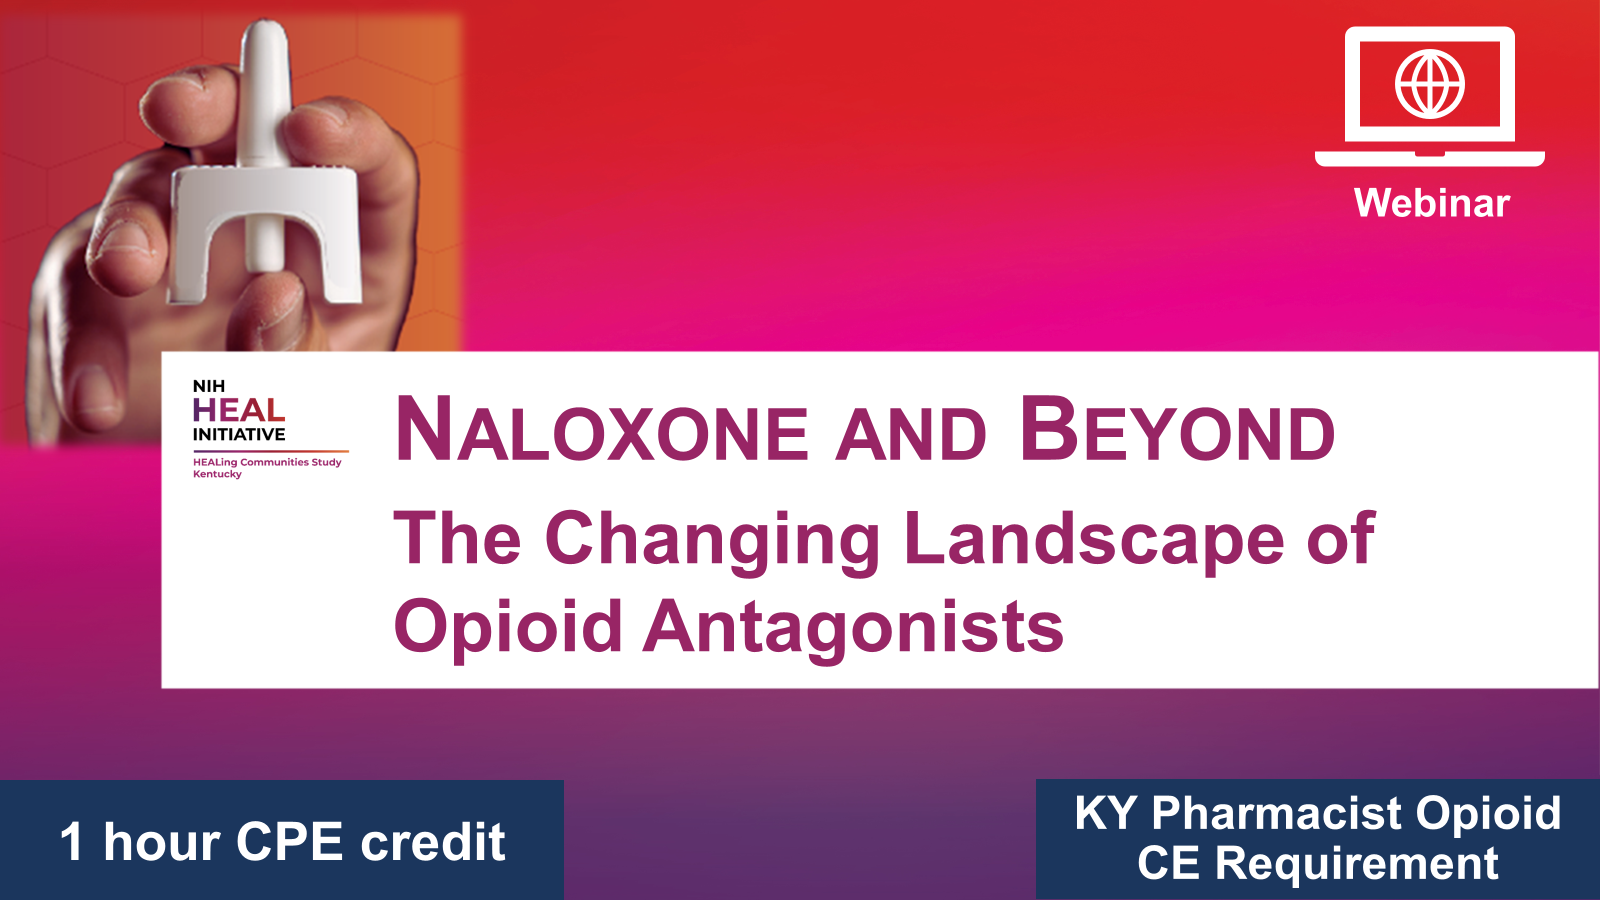 Naloxone and Beyond: The Changing Landscape of Opioid Antagonists 